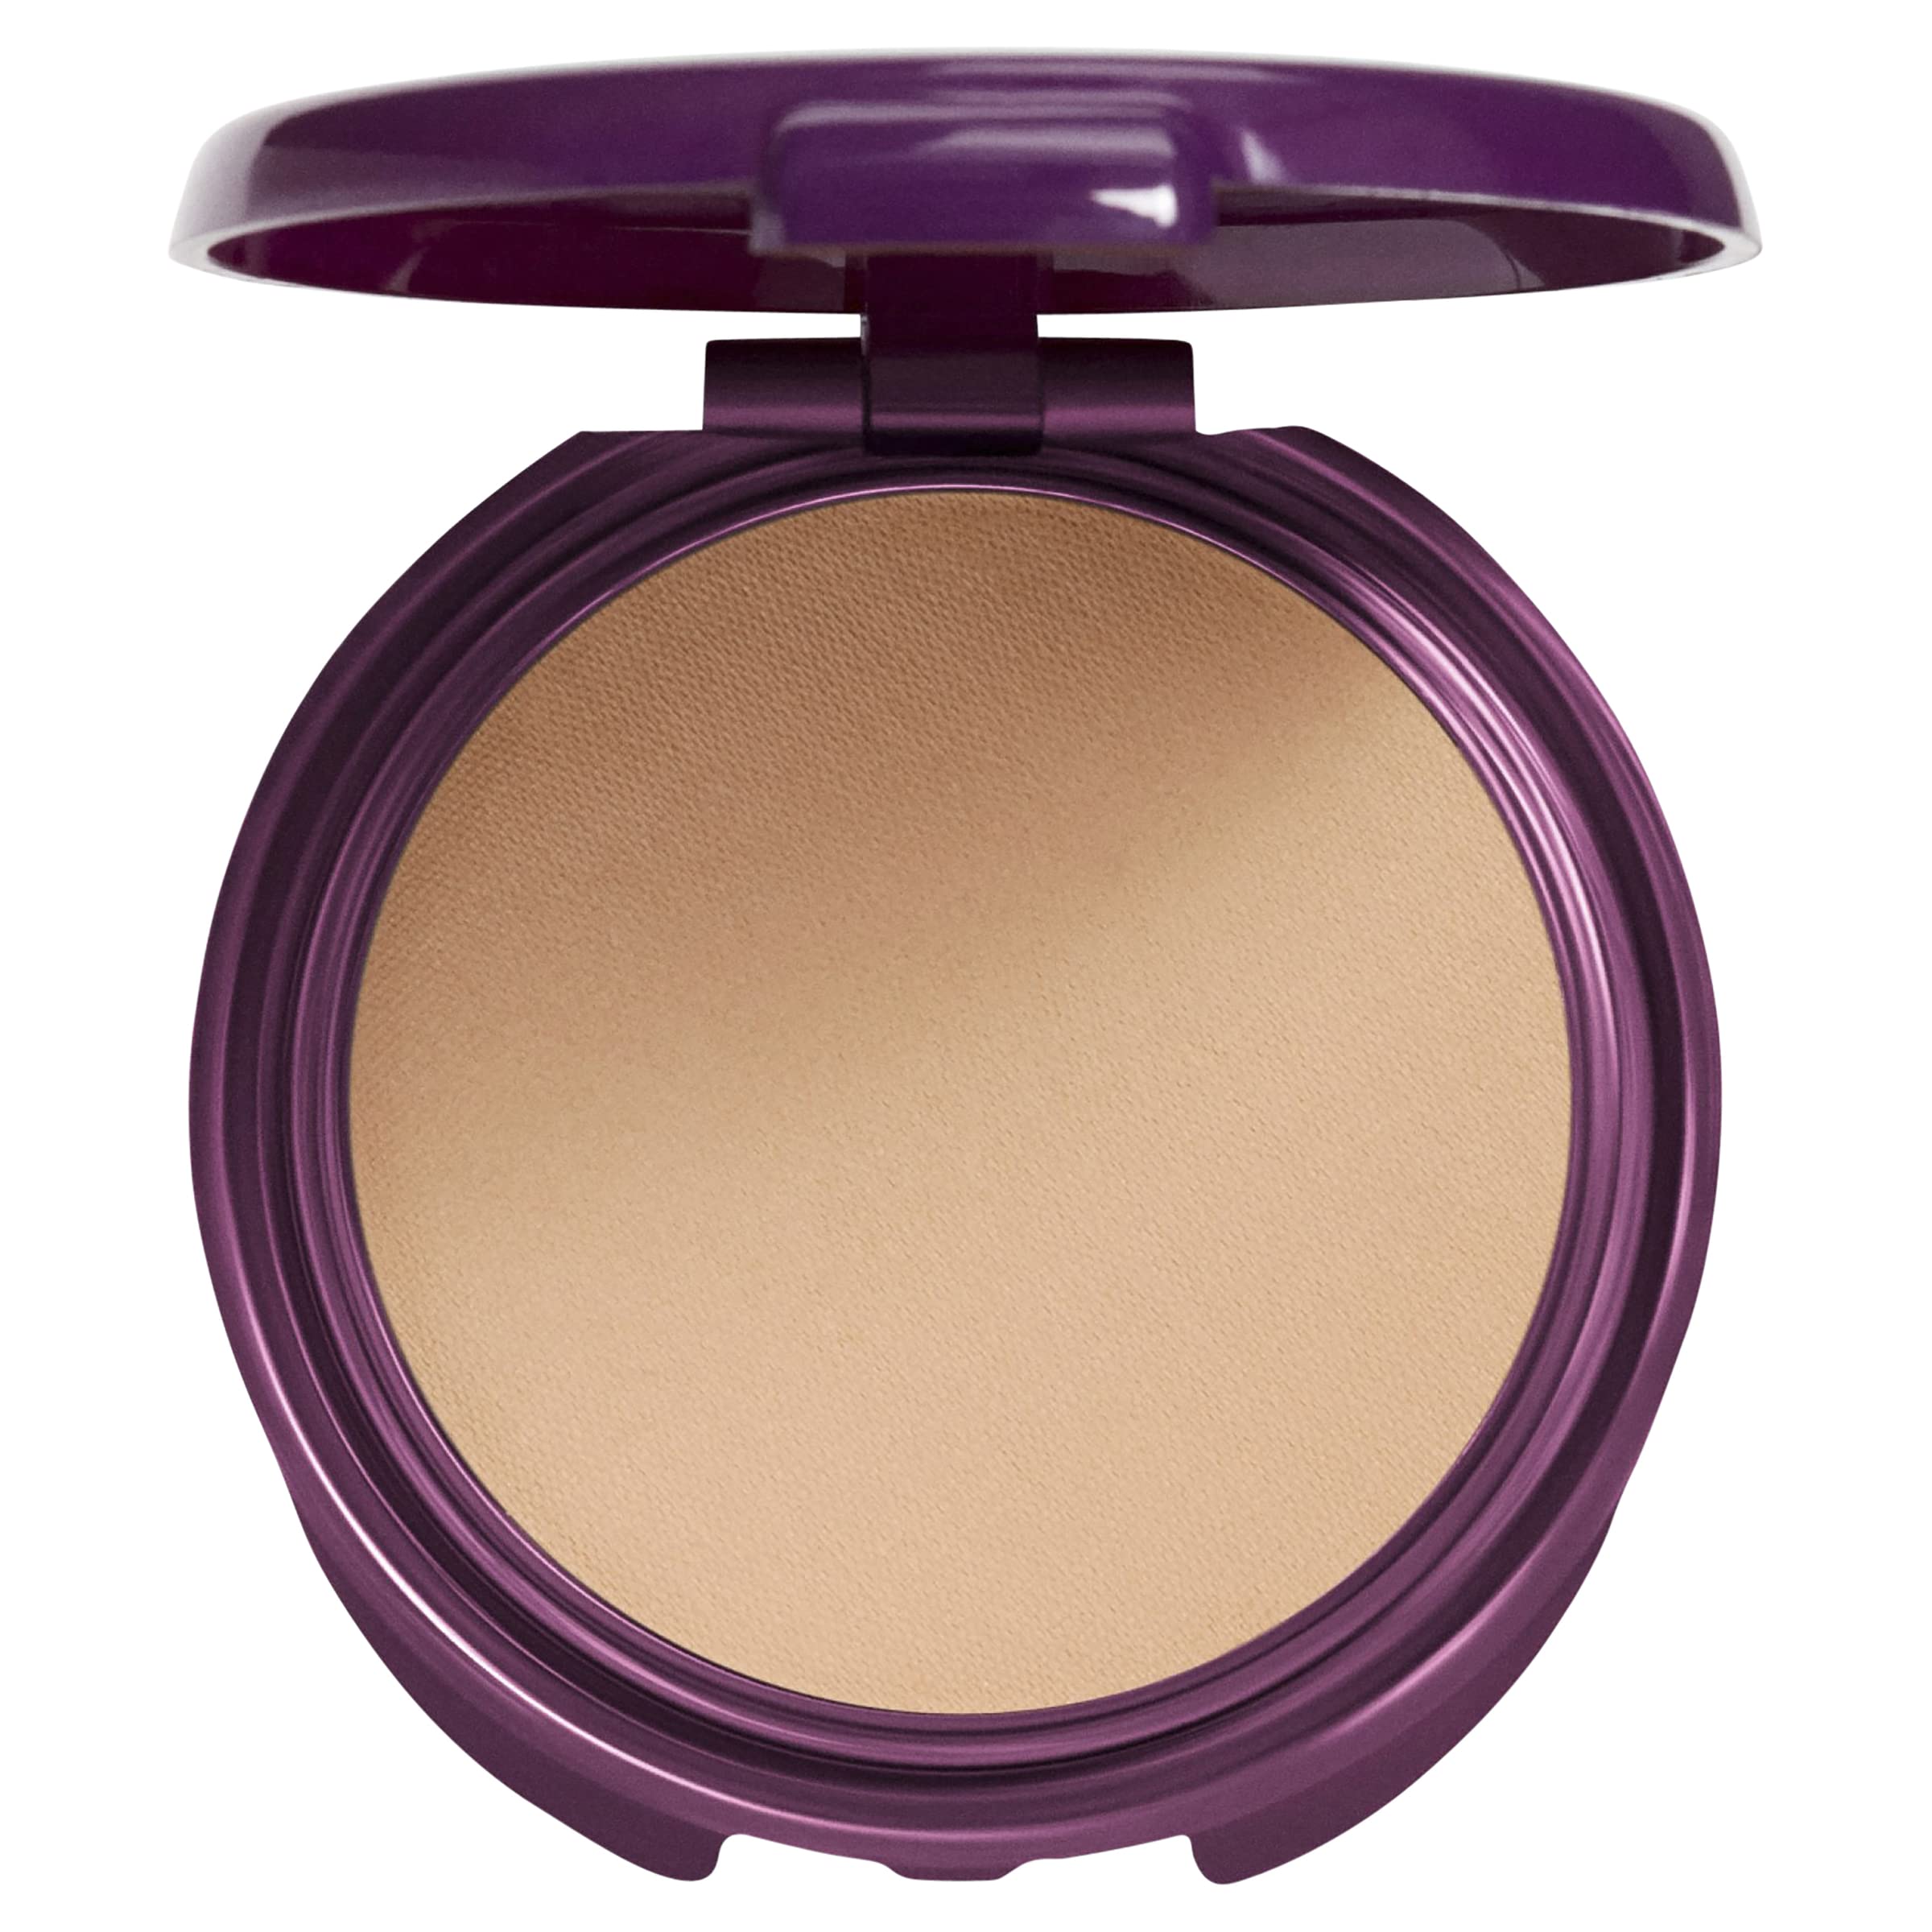 COVERGIRL Advanced Radiance Pressed Powder- Creamy Natural 110, 0.44 Fl. Oz. (packaging may vary)